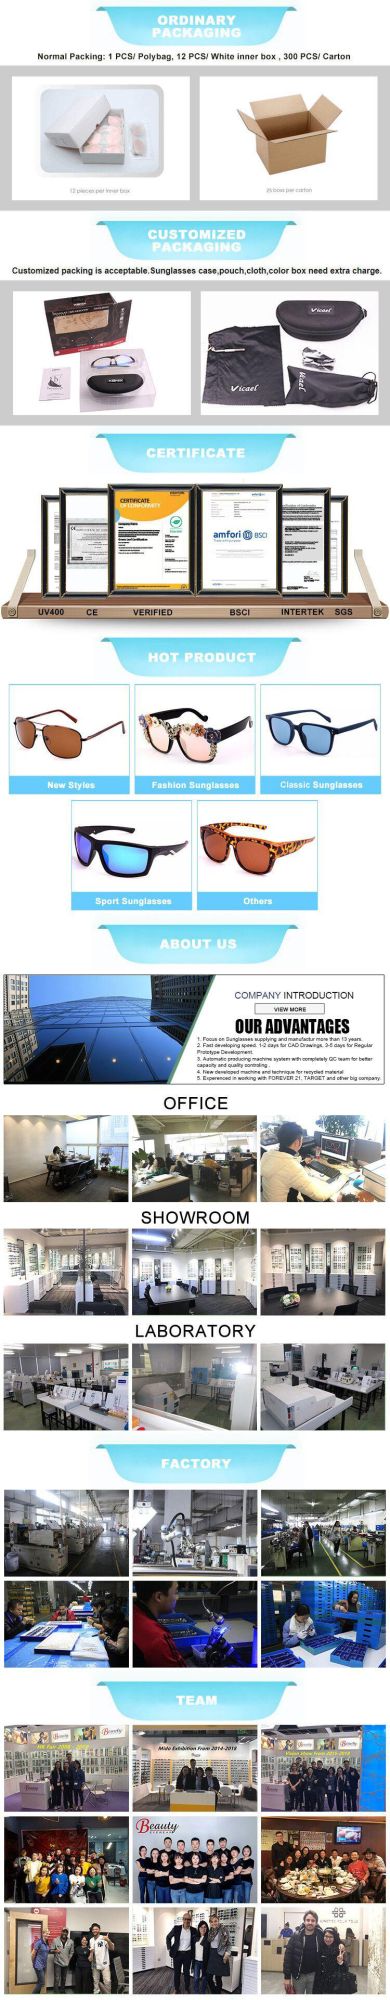 2020 Factory Directly Wrapped Colored Sports Sunglasses